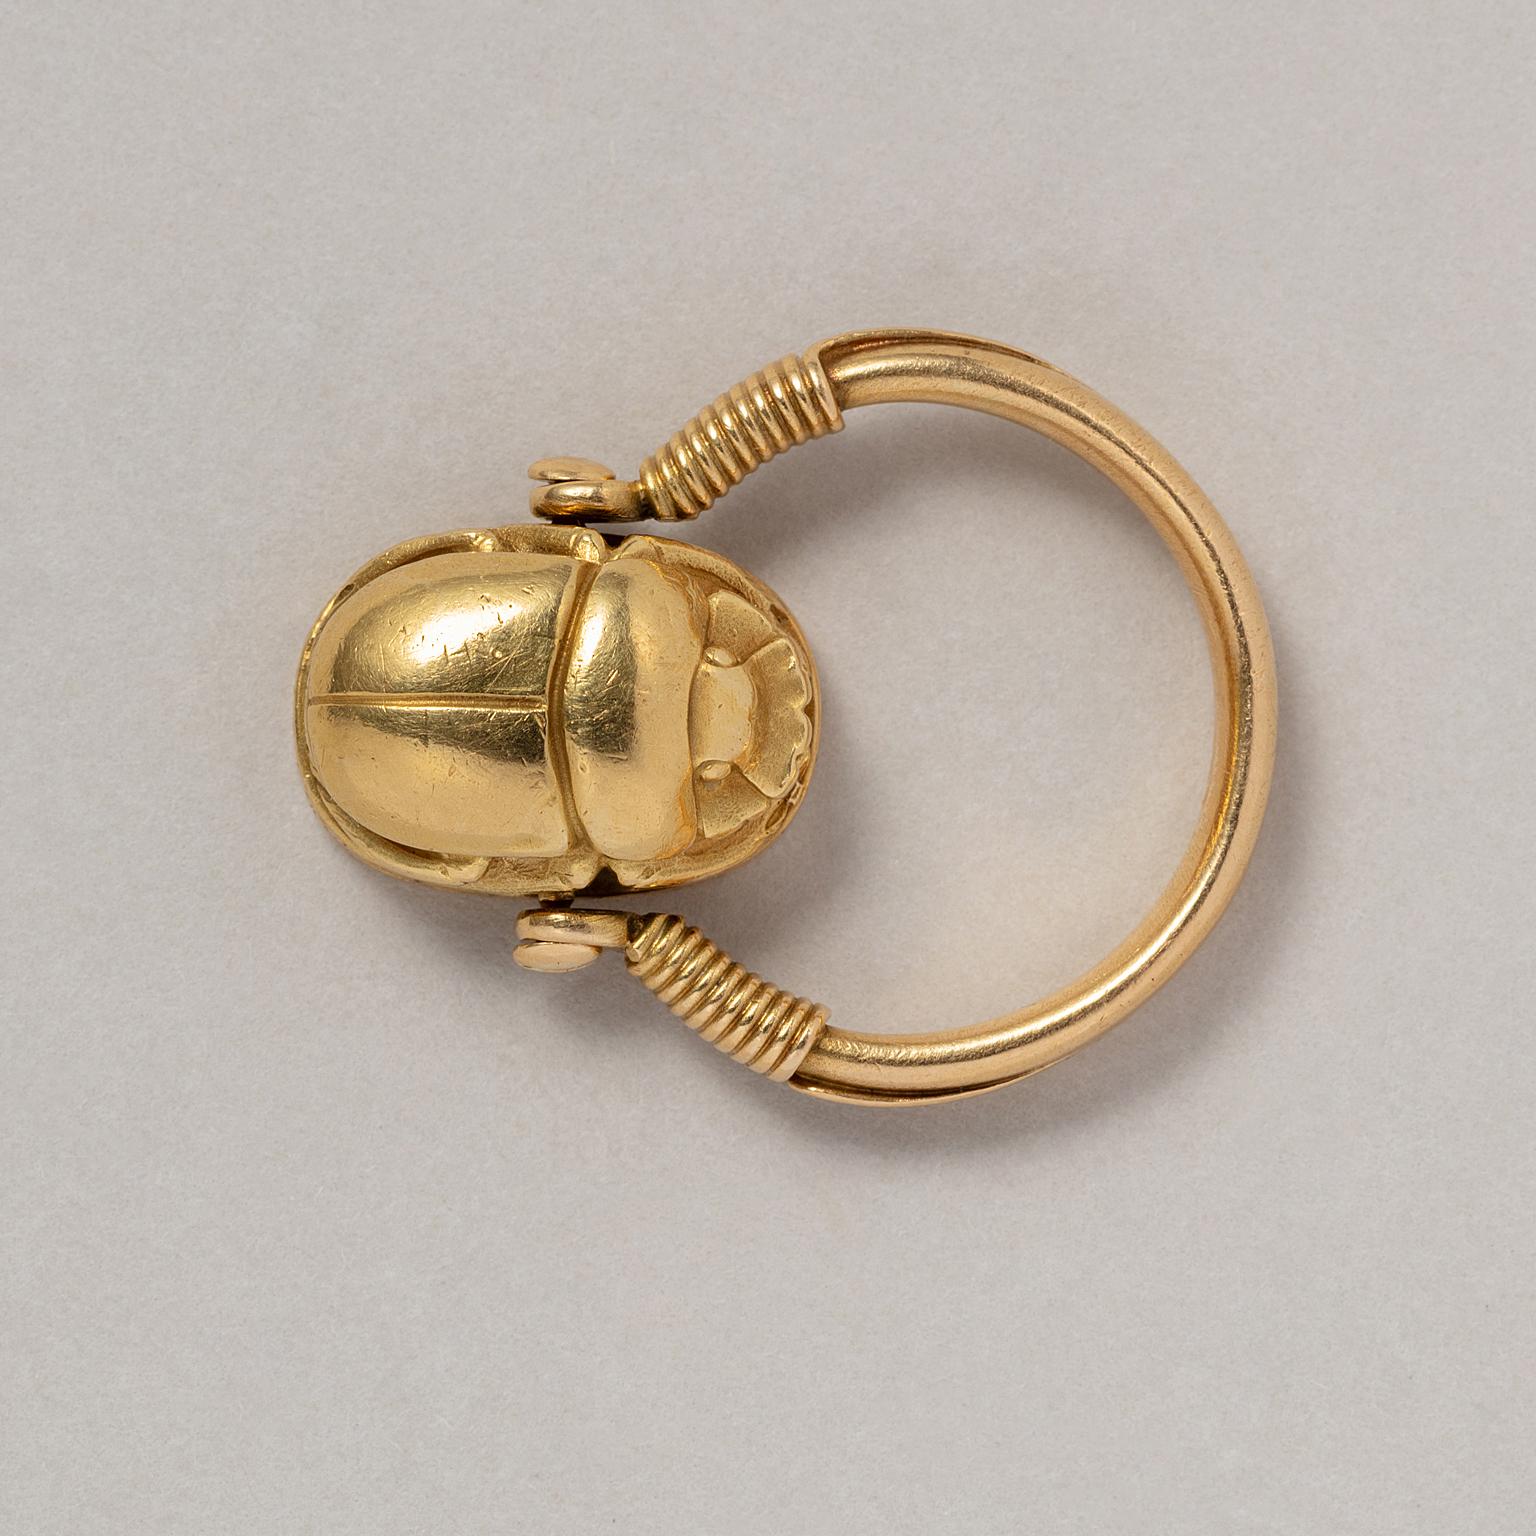 An 18 carat gold scarab ring swivel set with a rotating stylised Ancient Egyptian scarab between tapering shoulders wrapped in gold wire, with a rounded shank, the reverse of the scarab is blank, opening to reveal a hidden locket compartment, French